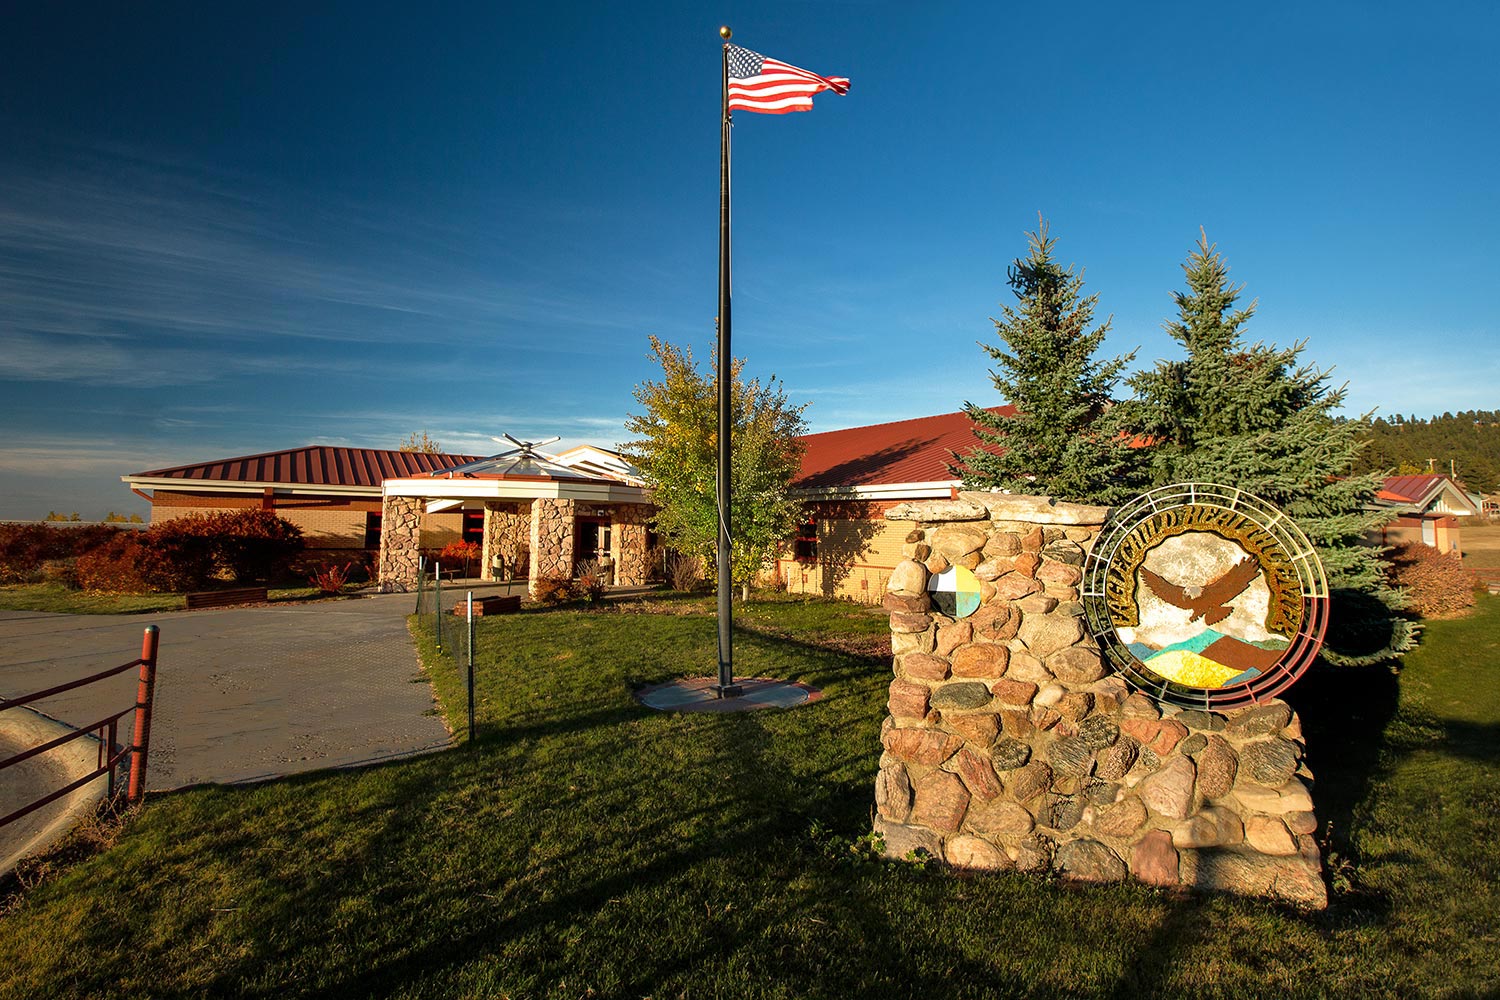 The Eagle Child Health Center in Hays, Montana.